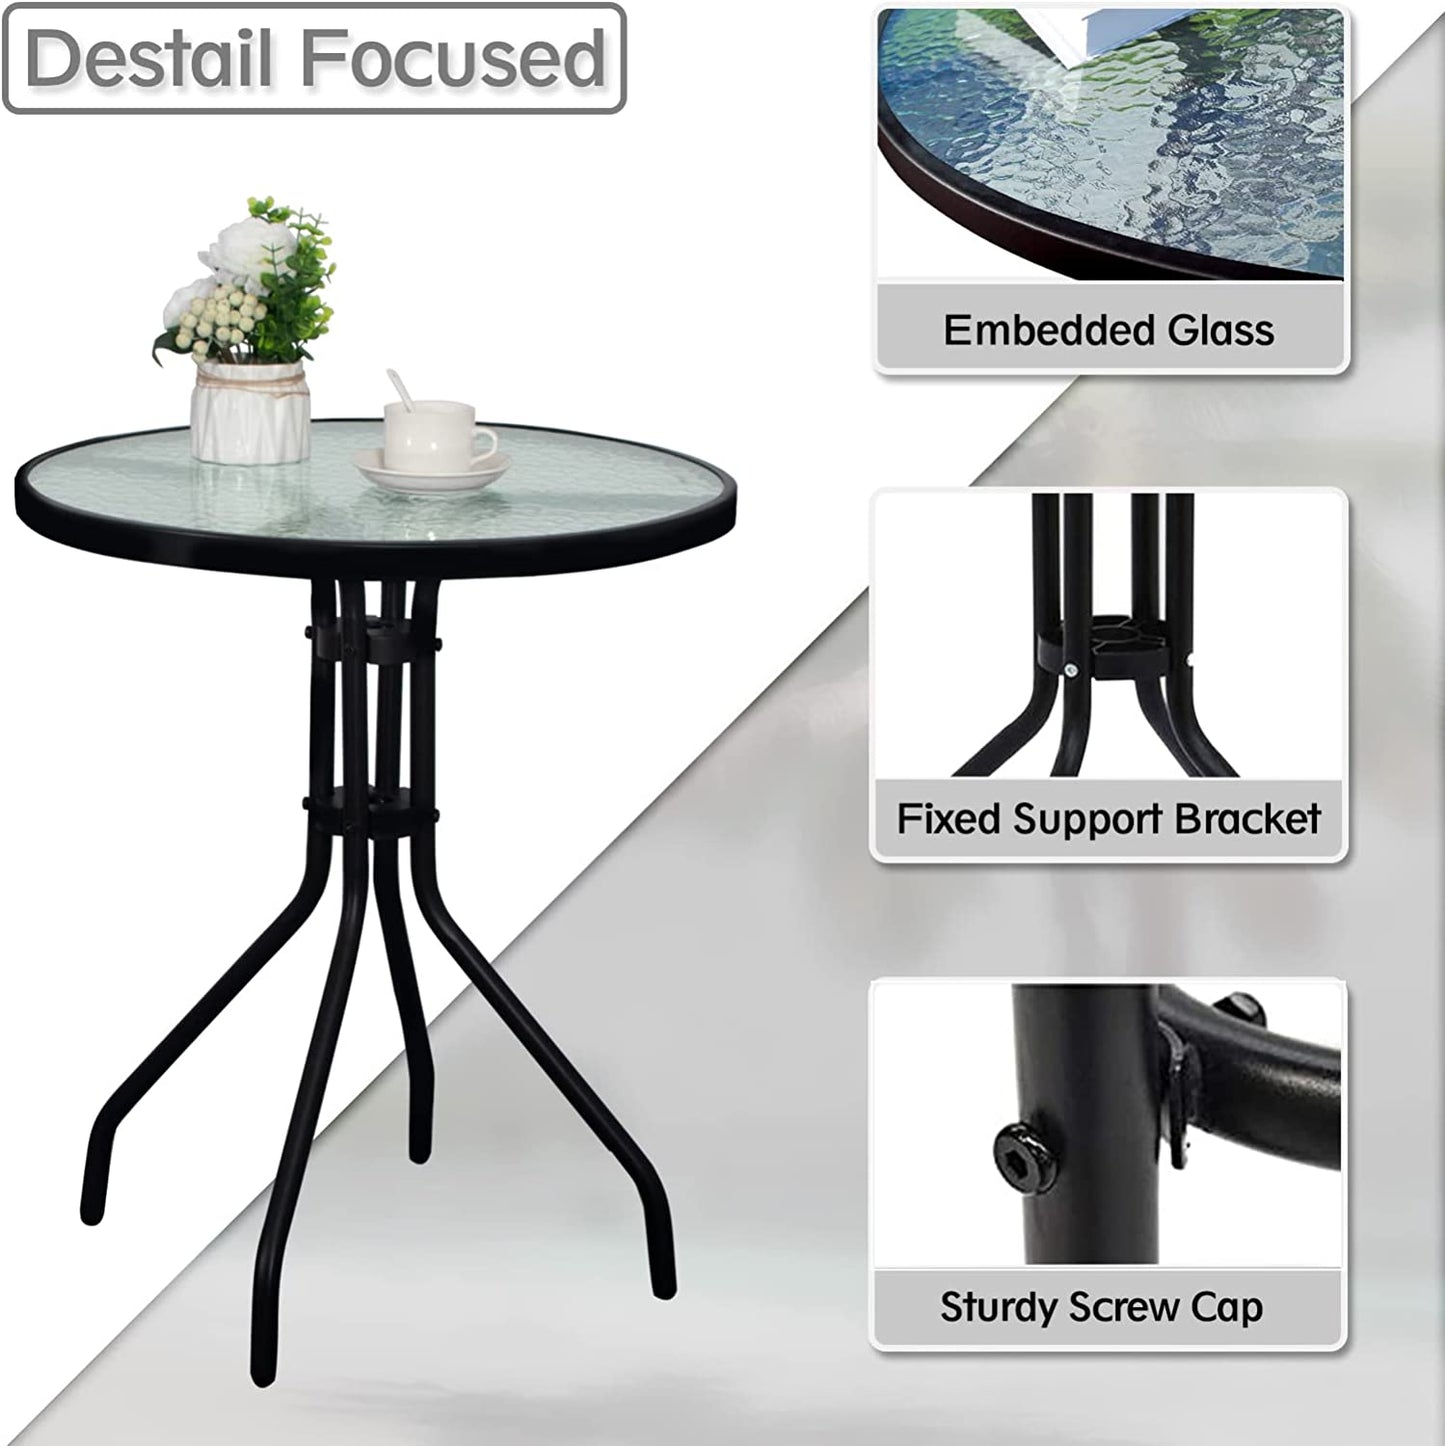 DIMAR GARDEN 24" Outdoor Side Table Patio Metal round Bistro Coffee Table with Glass Top,Black